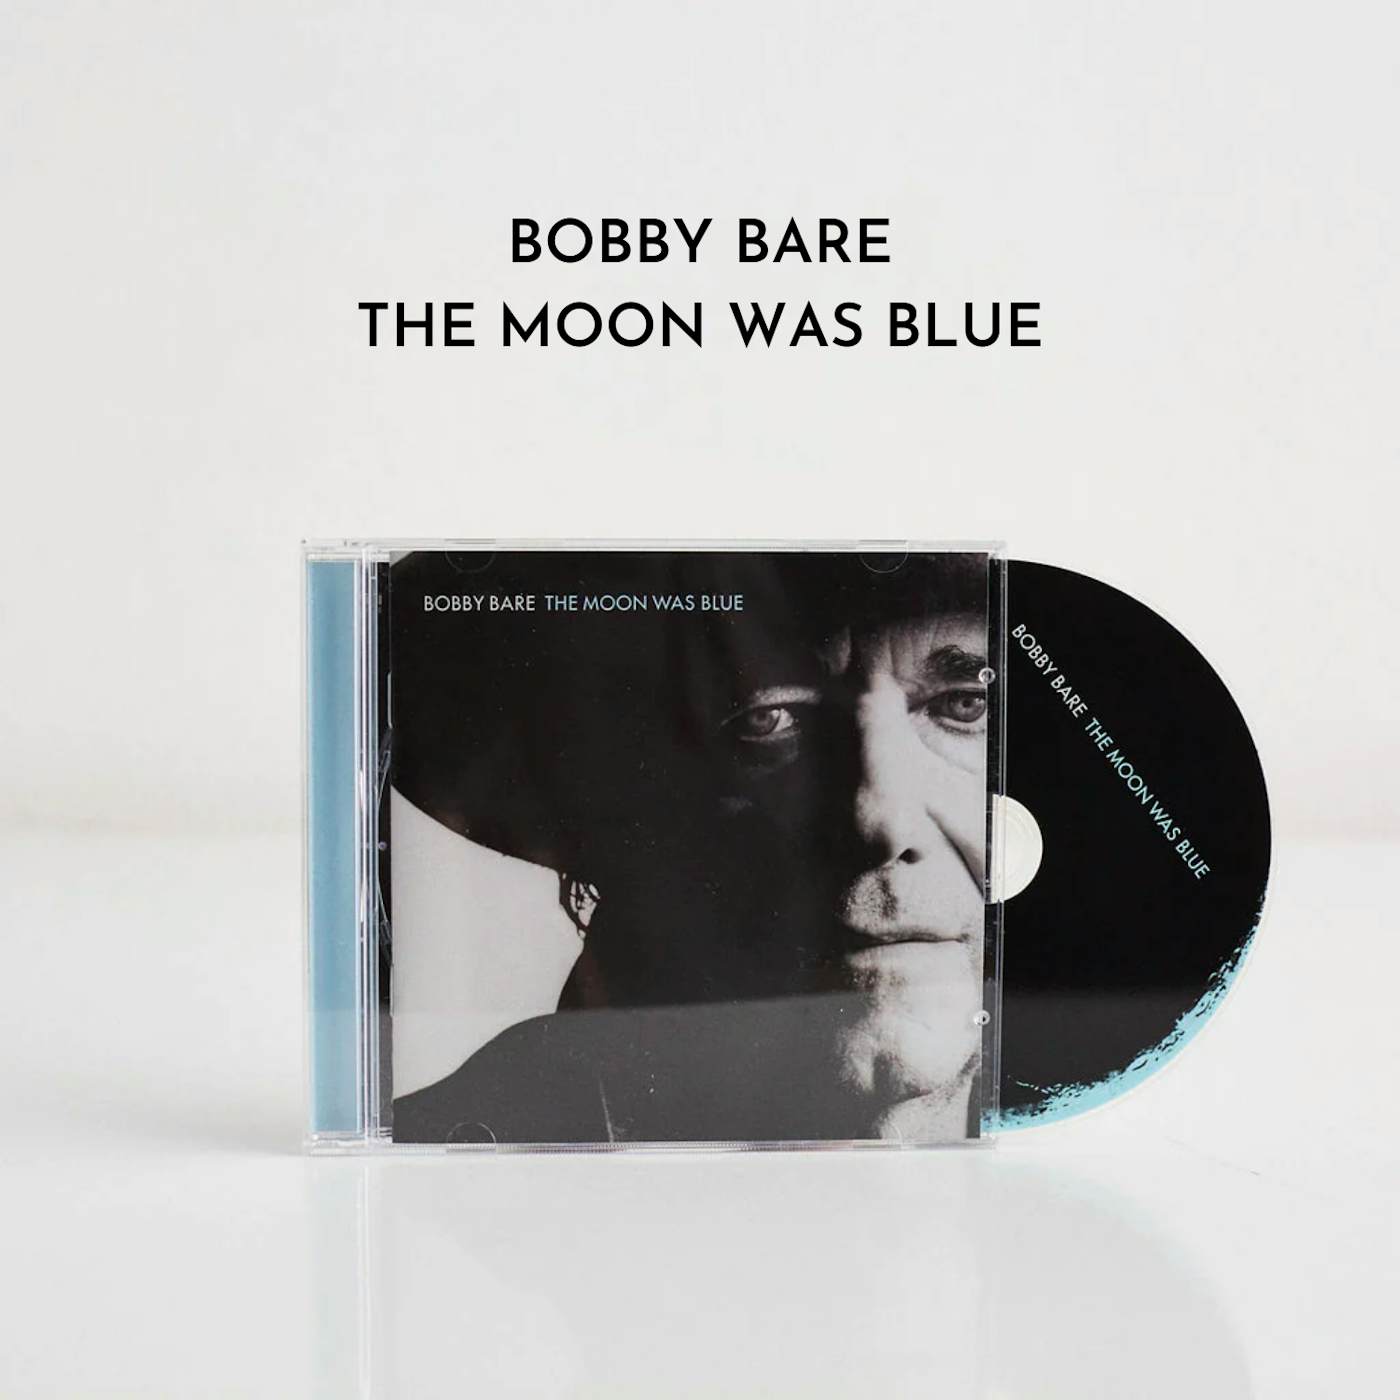 Bobby Bare The Moon Was Blue (CD)